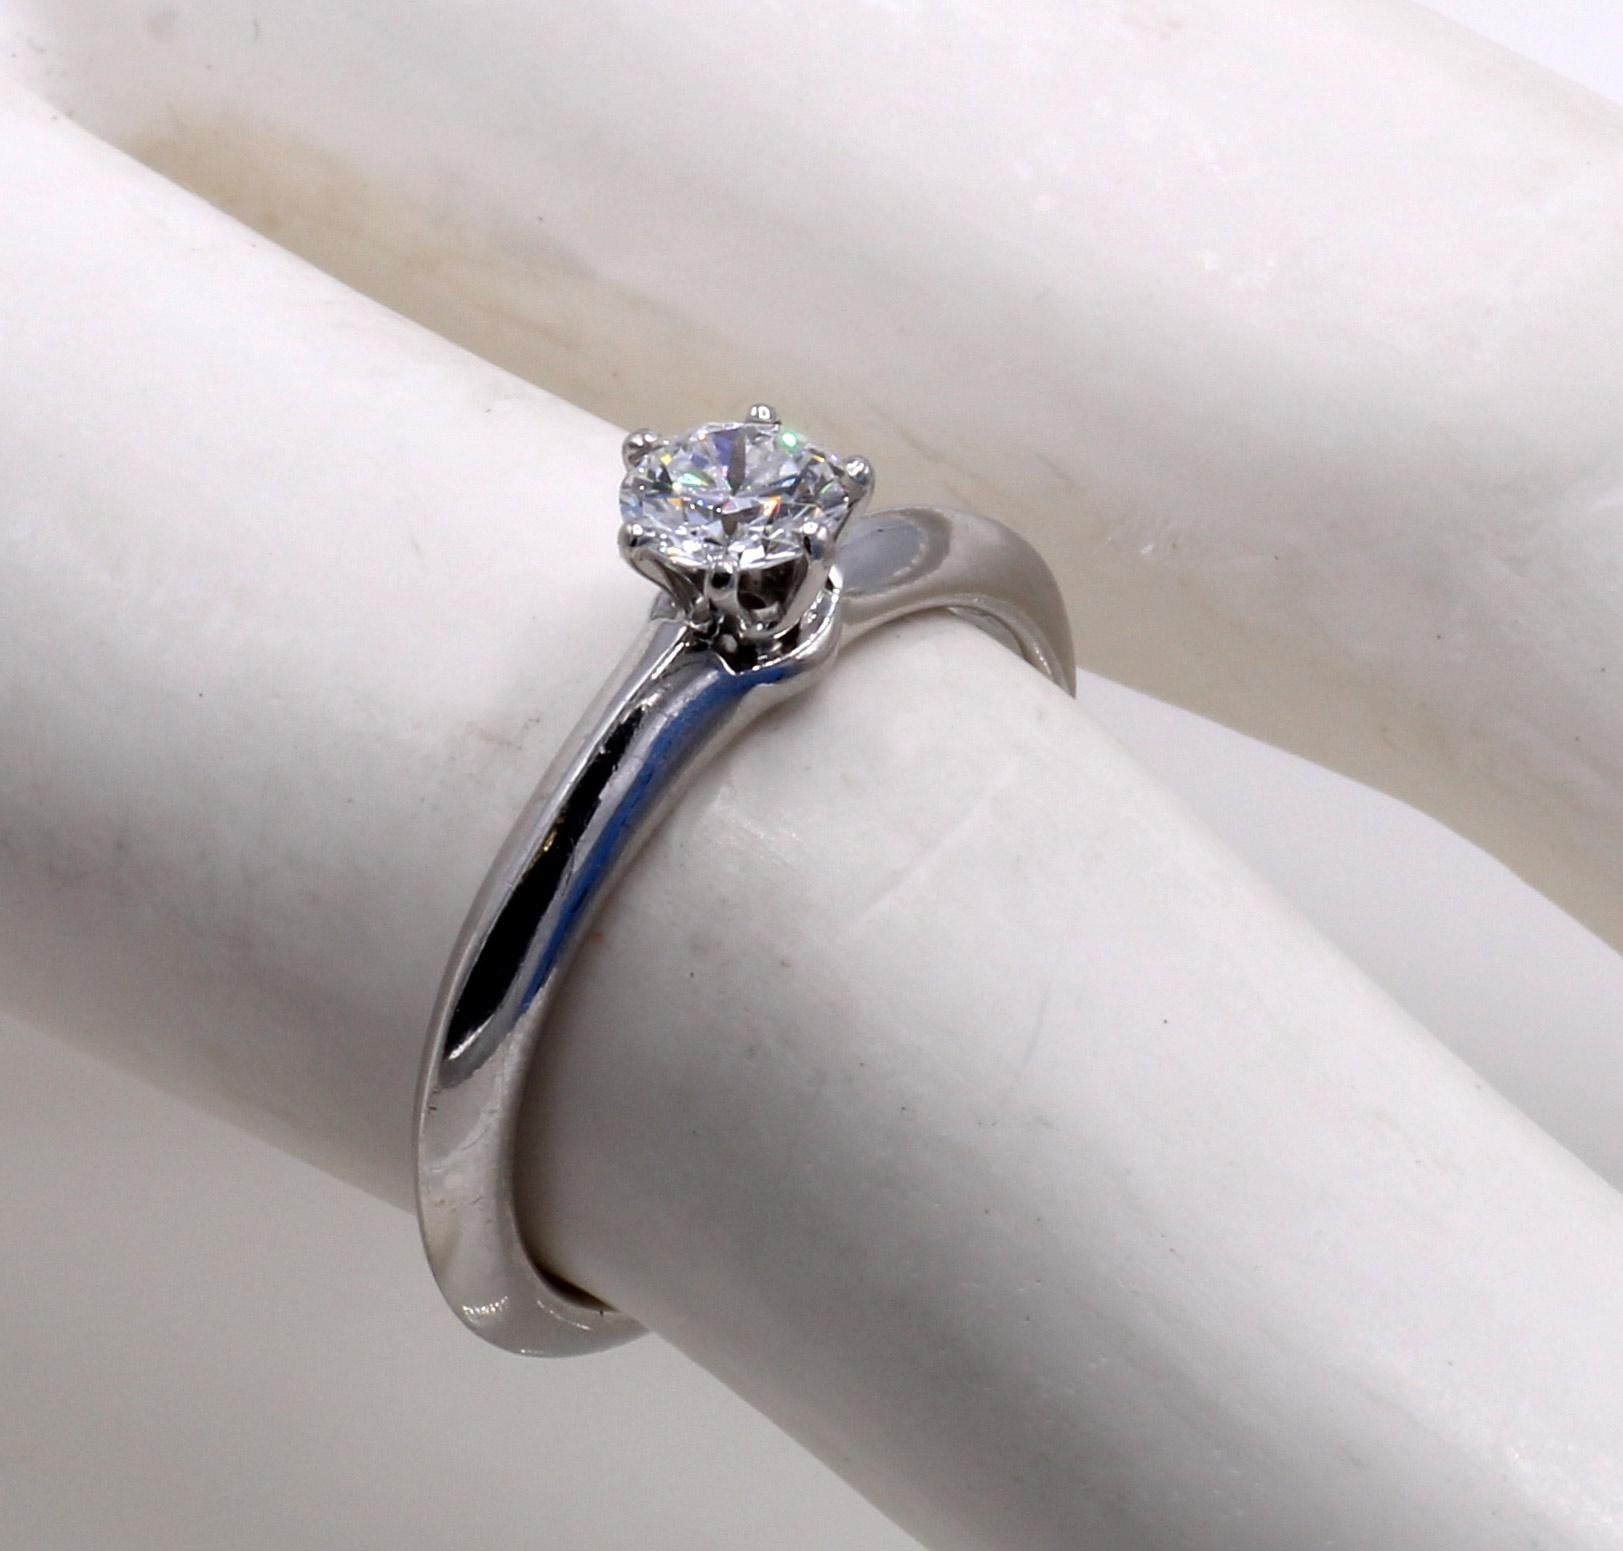 Platinum handcrafted ring by Tiffany & Co. featuring a perfect round brilliant cut diamond secured by 6 prongs. The central diamond is accompanied by a Tiffany certificate stating that the color is D and the clarity  IF - the highest color and